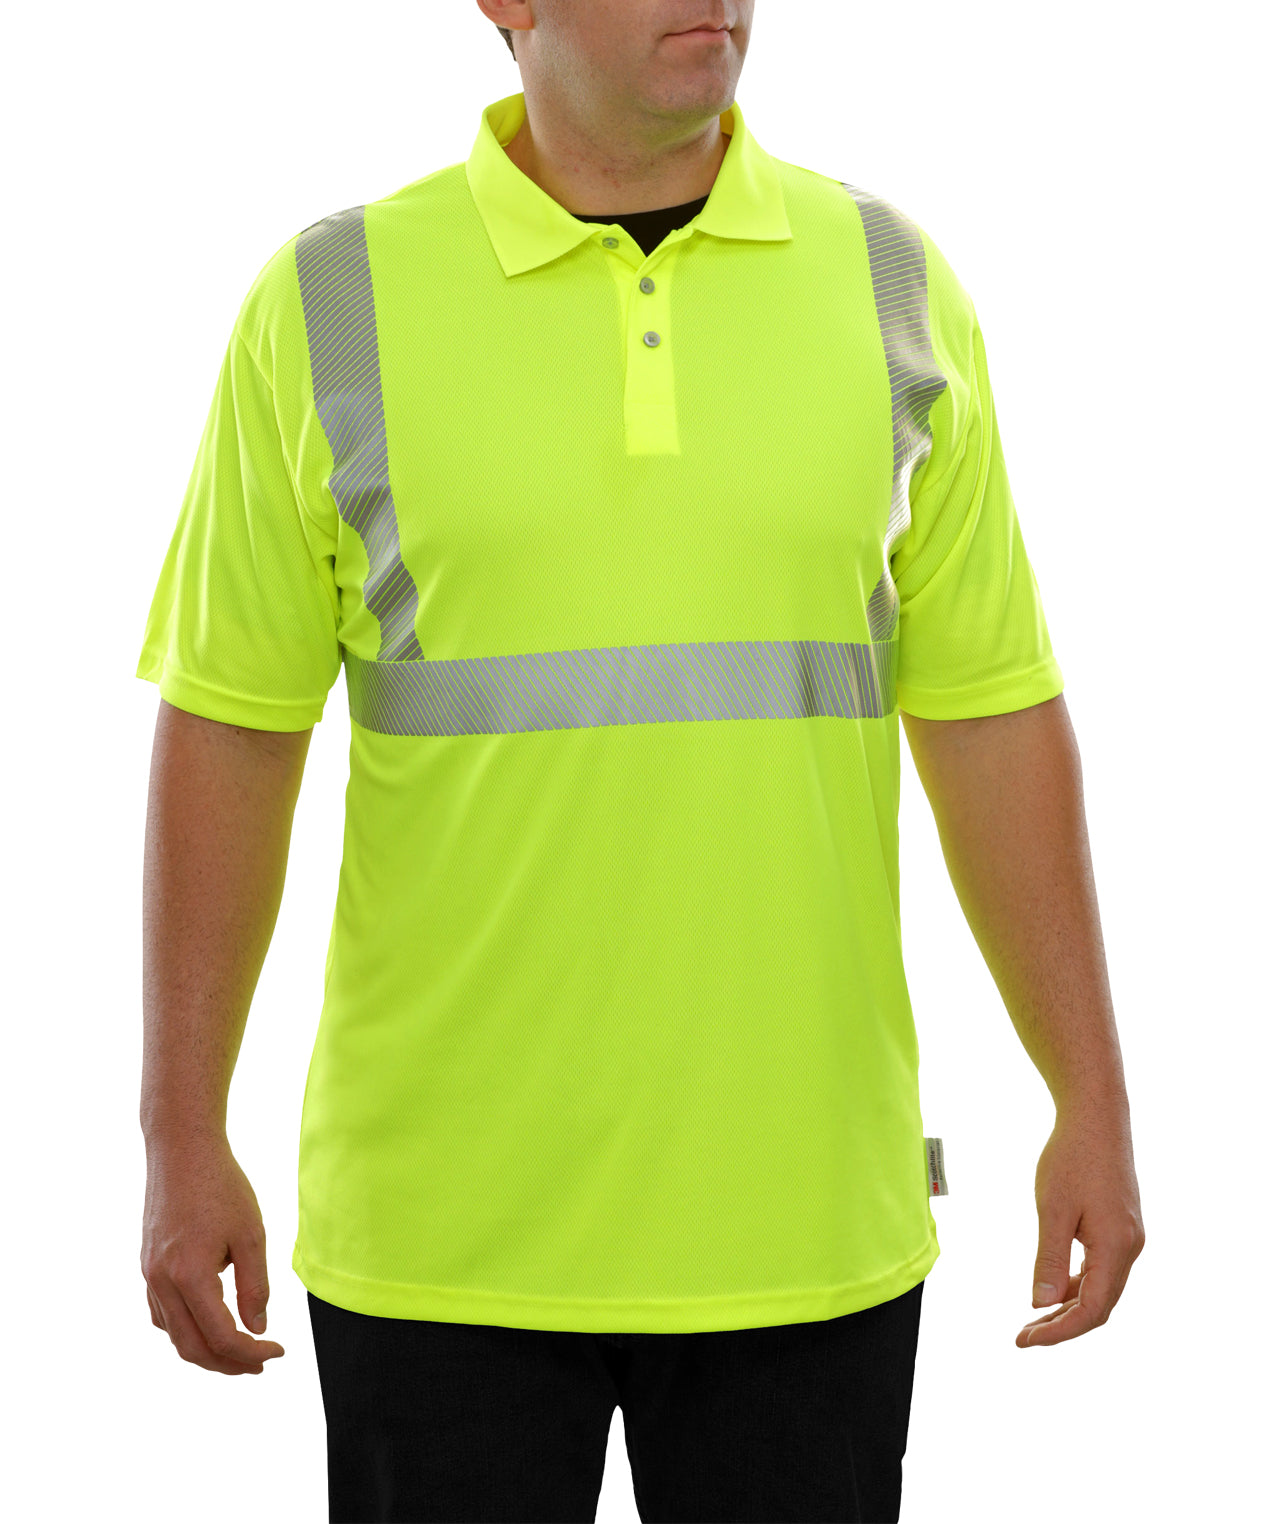 302CTLM Hi-Vis Birdseye Safety Polo Shirt with Comfort Trim by 3MTM